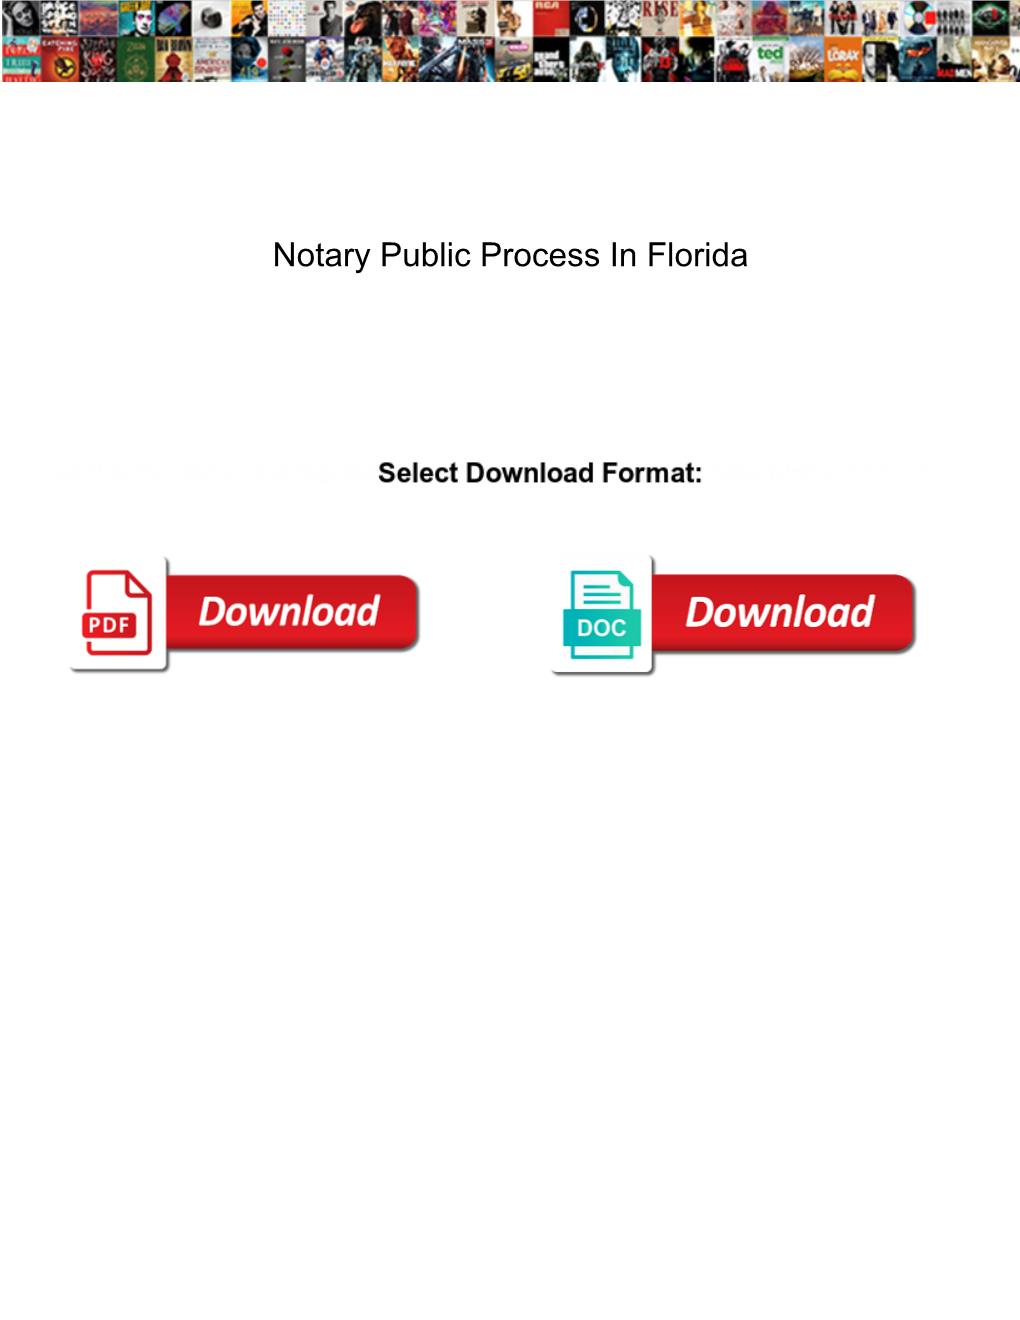 Notary Public Process in Florida